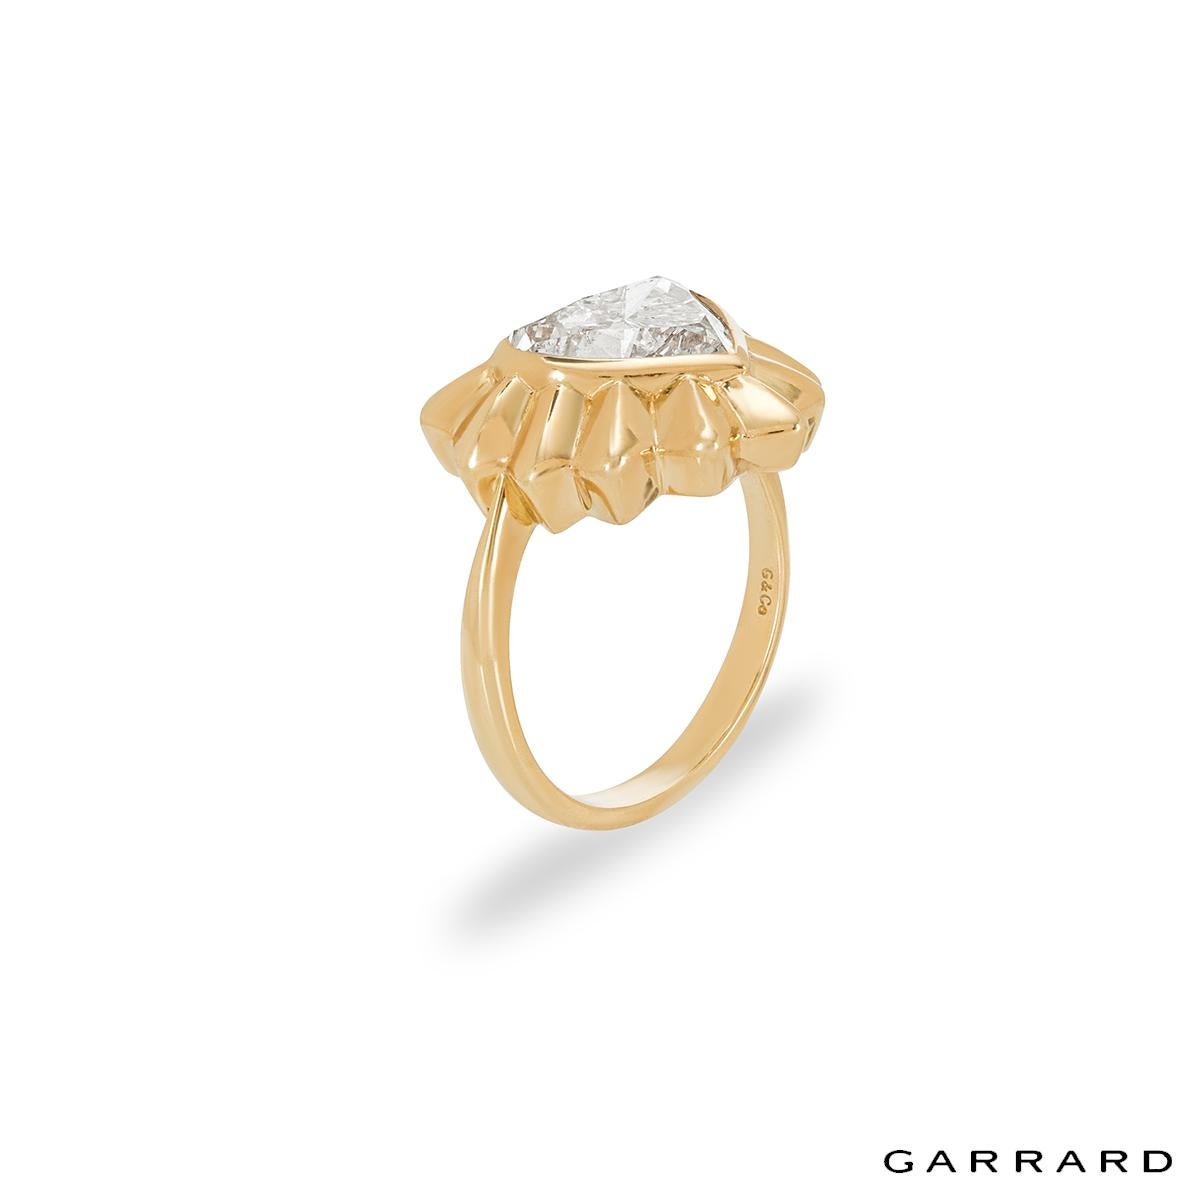 A unique 18k yellow gold Garrard diamond ring. The ring comprises of a heart motif with a heart cut diamond in a rubover setting. The diamond has a weight of 2.68ct, G colour and SI2 clarity. The ring is a size UK K½, US 5.75 EU 50.5 but can be